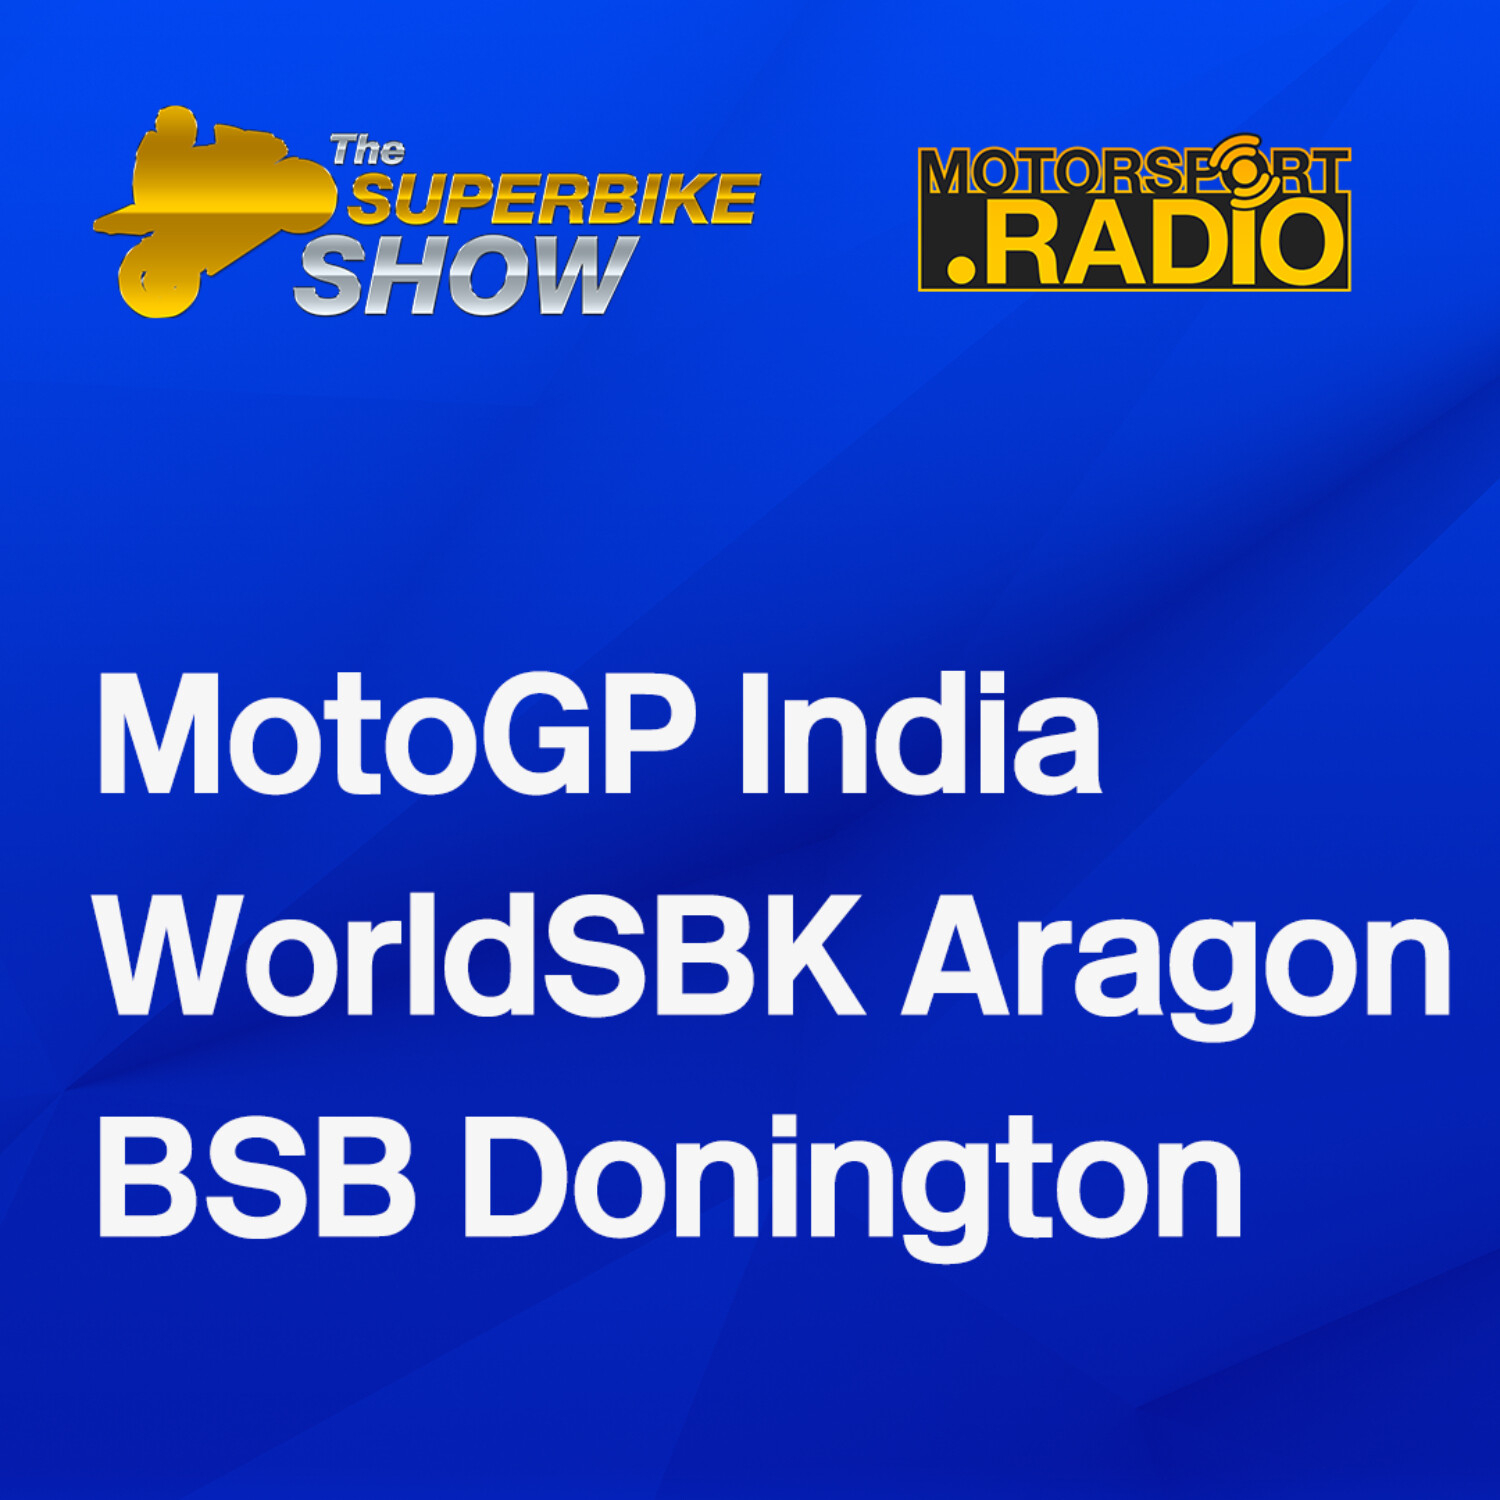 #MotoGP India Review #WorldSBK Aragon and #BSB Donington Preview